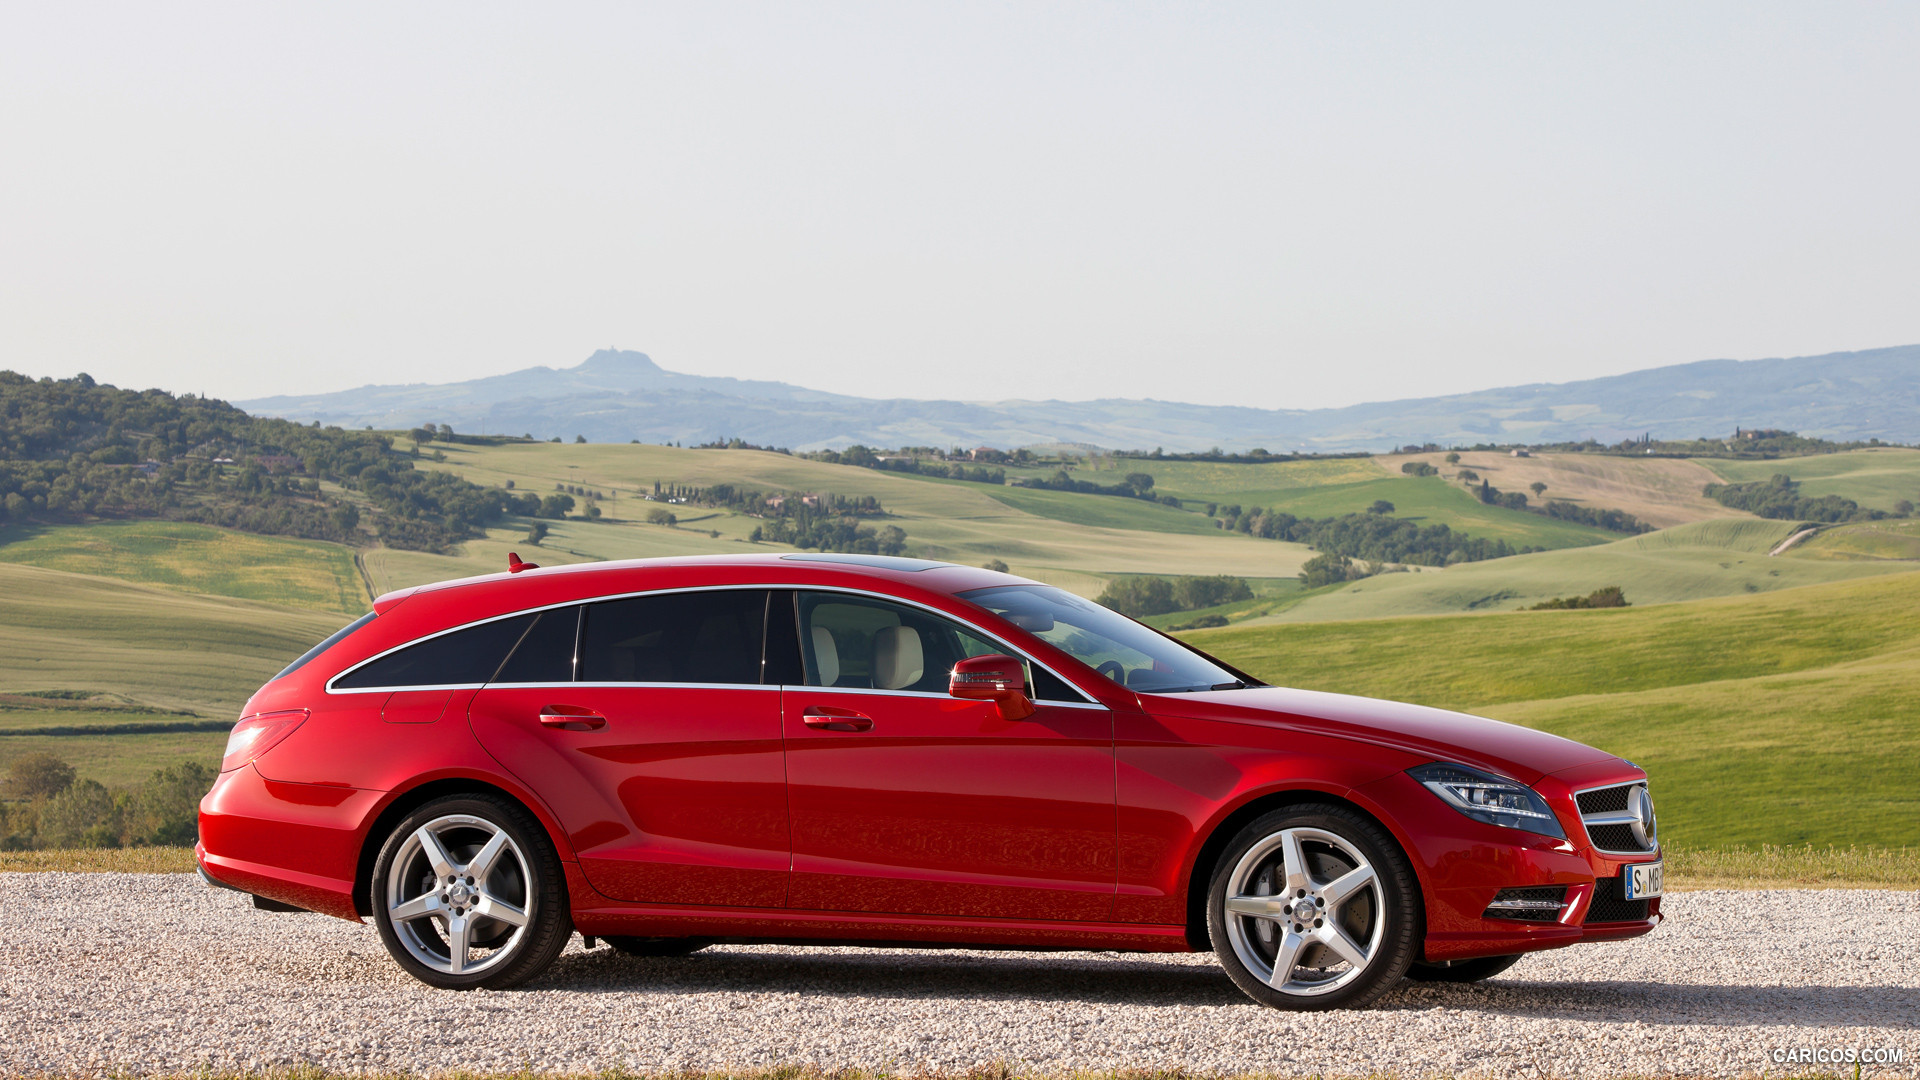 2013 Mercedes-Benz CLS 500 4MATIC Shooting Brake - Side, #3 of 184